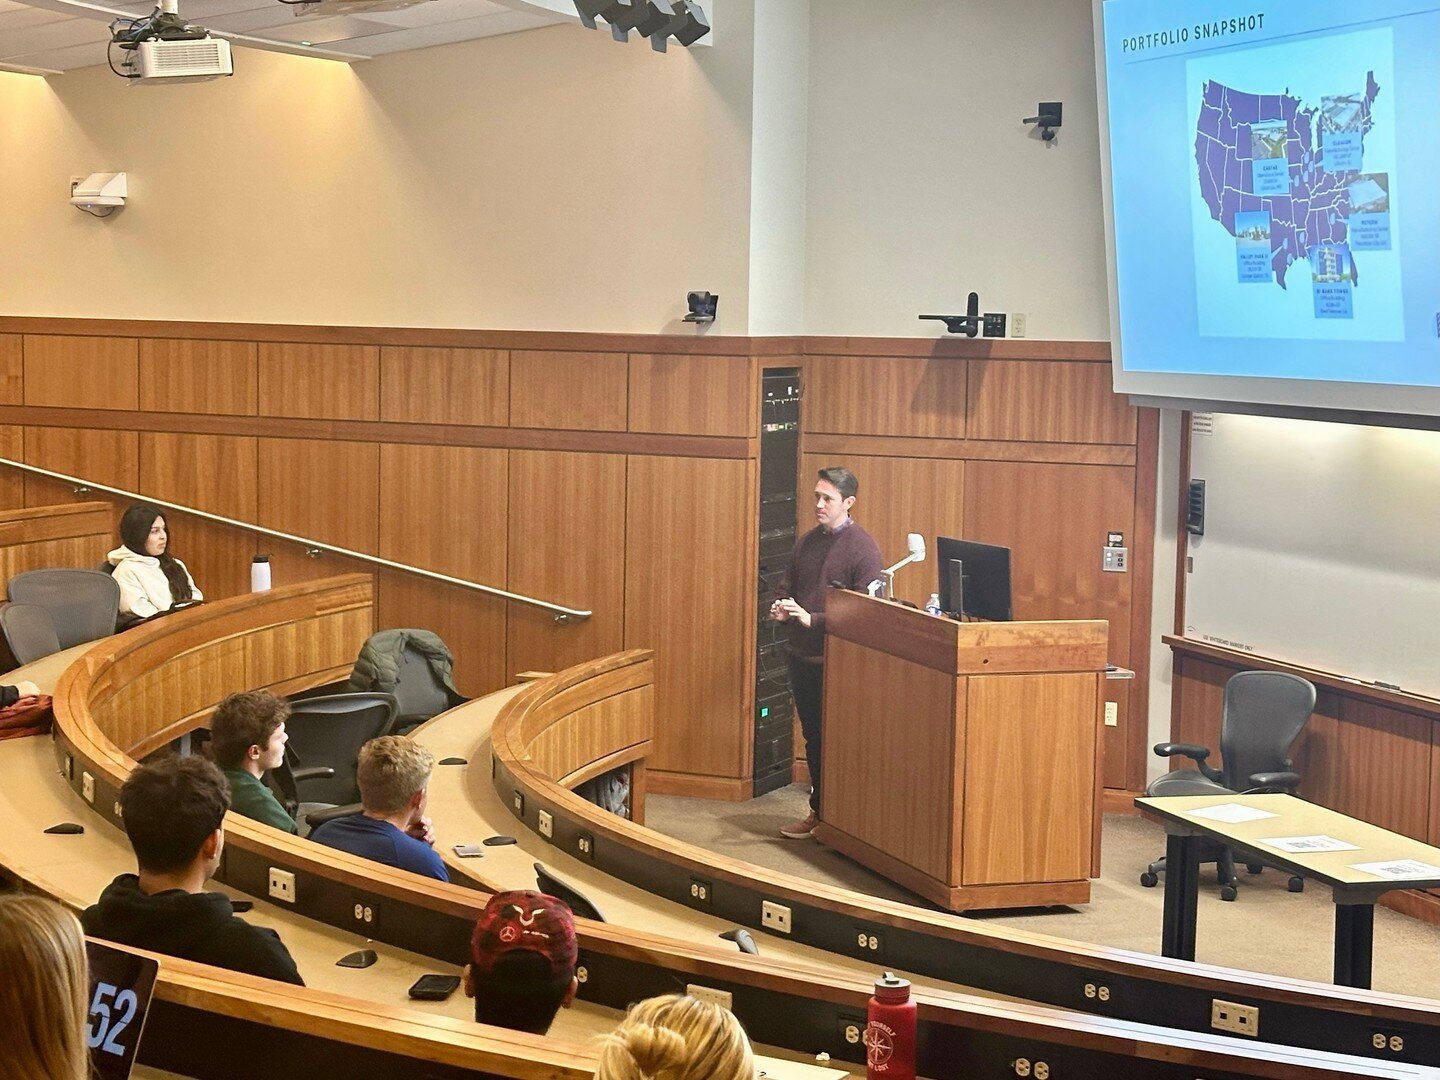 Sago co-founder Jeremy Osborne was invited to speak to students in the real estate program at the Daniels School of Business at Purdue University this week. Jeremy presented Sago's investment thesis and a case study on a full-cycle deal the firm is c